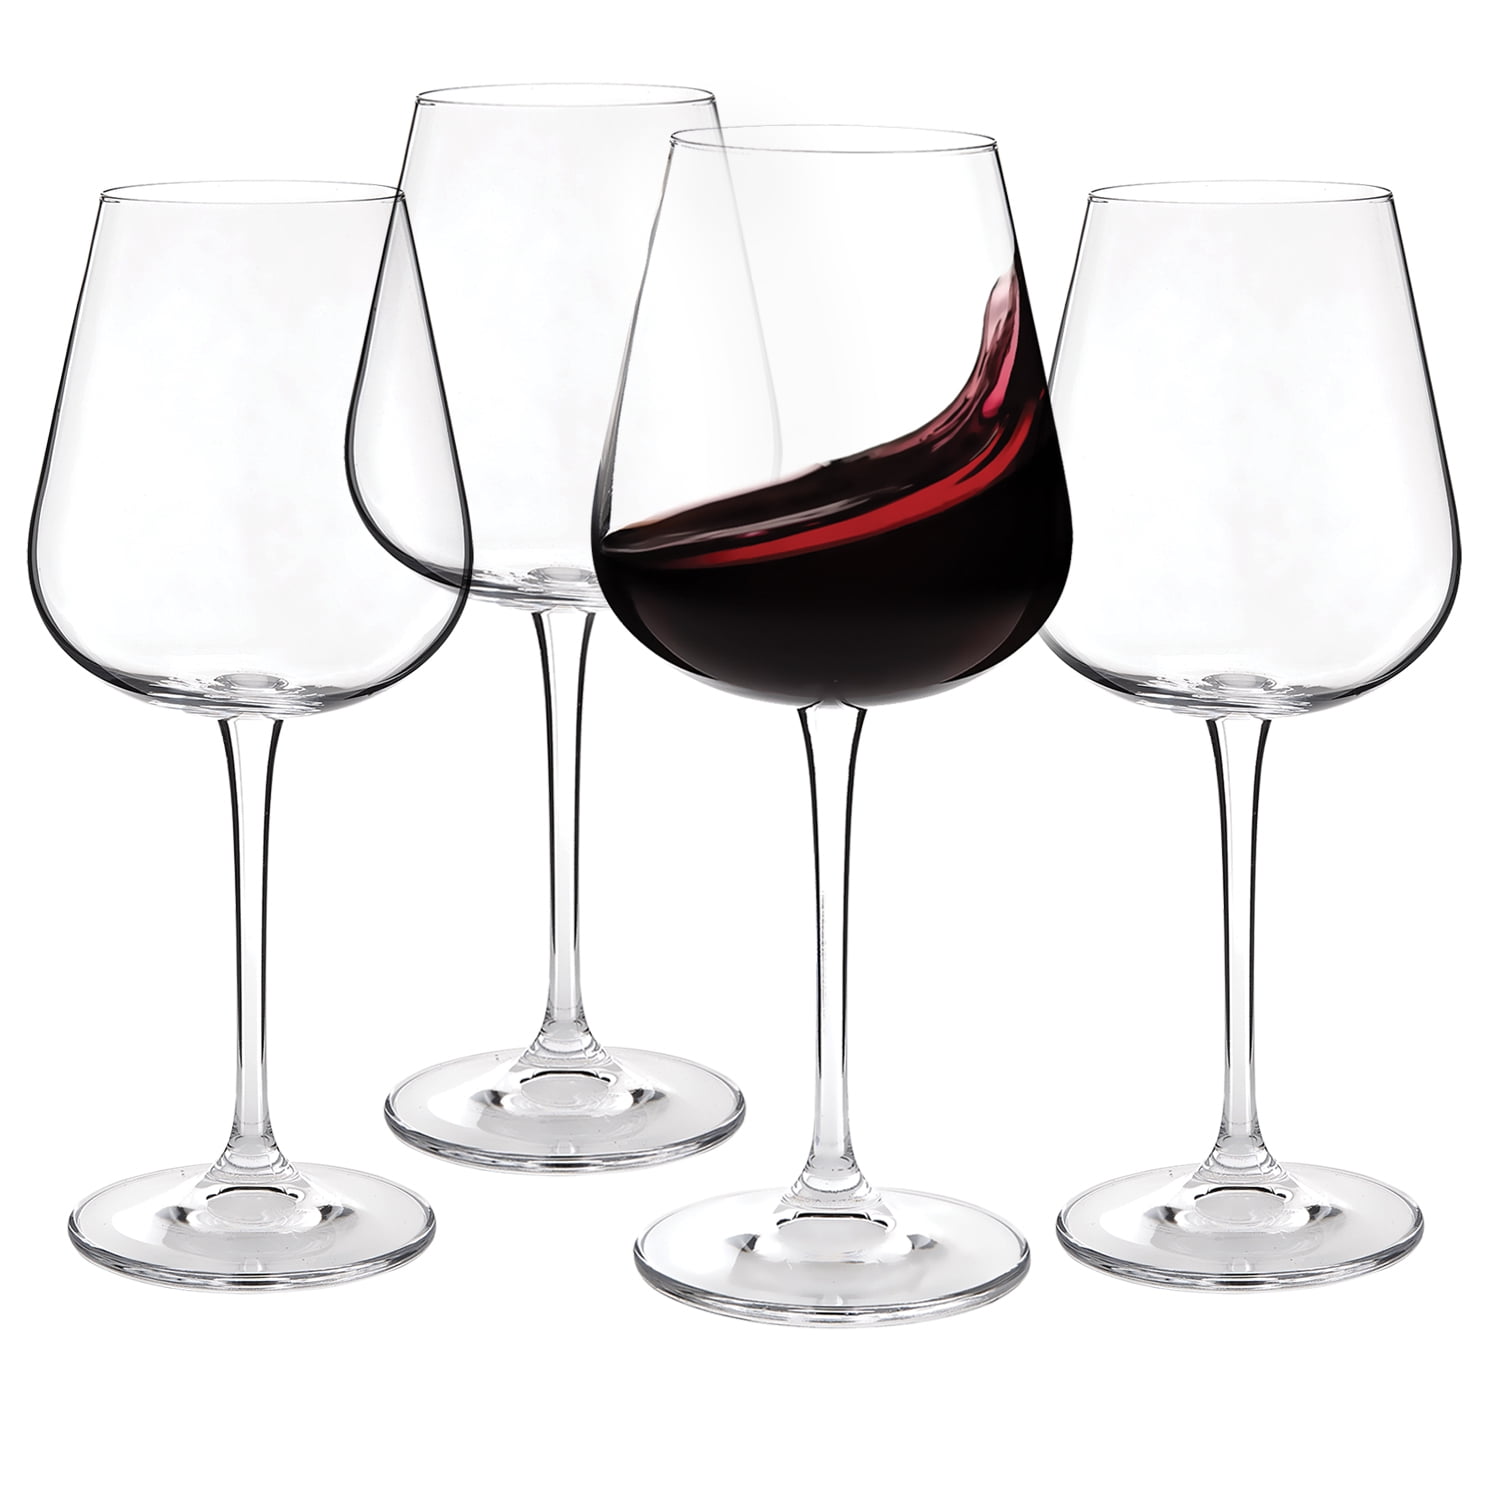 Wine Glasses Set of 4-14 oz Red and White Wine Glasses, Unique Wine Glass  Set, European Wine Glass S…See more Wine Glasses Set of 4-14 oz Red and